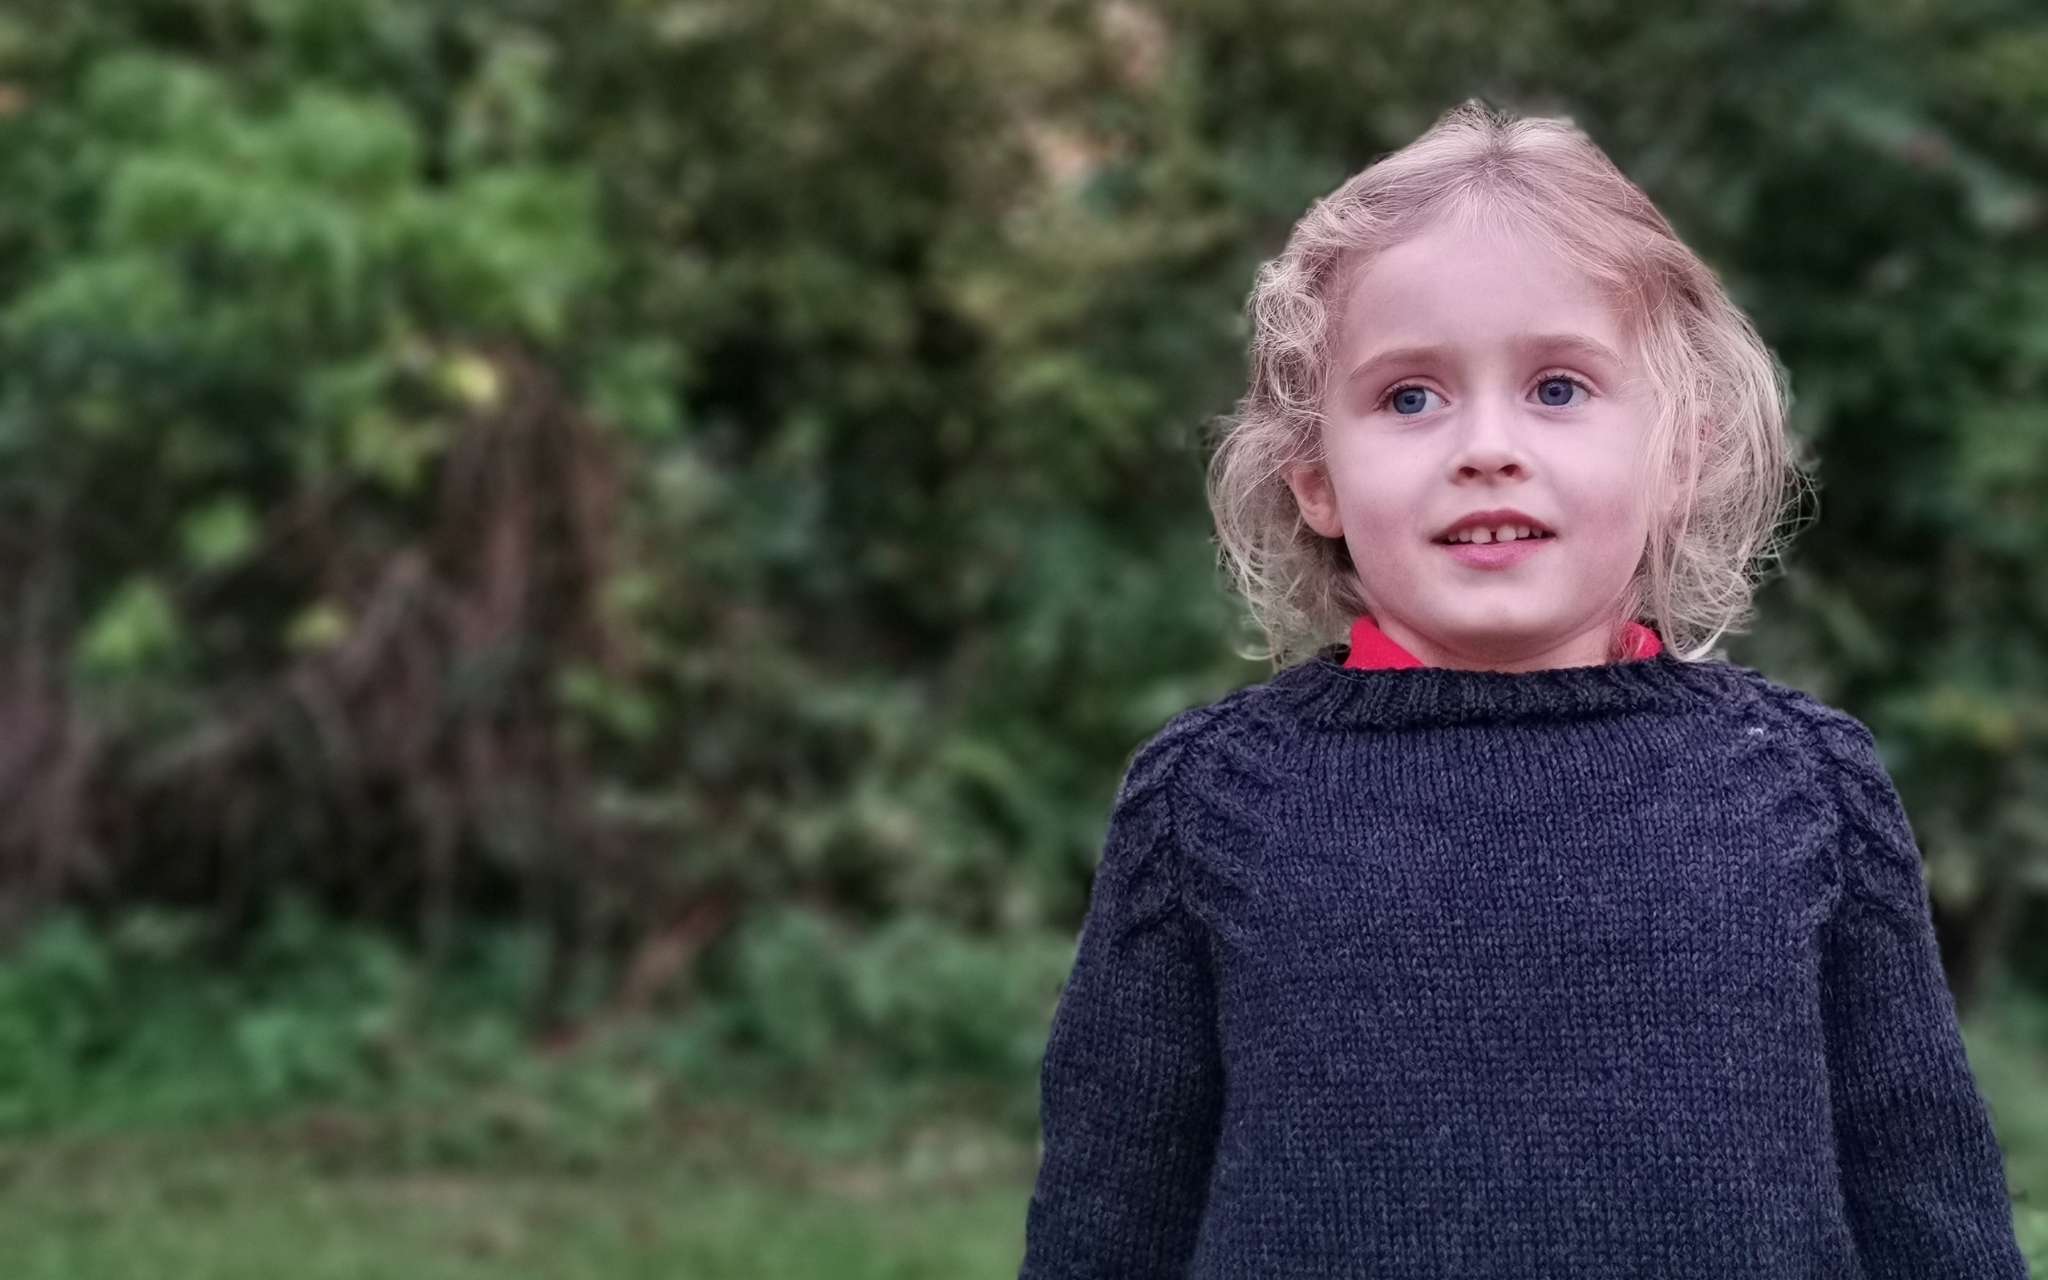 A young child with wavy blond hair wears a black sweater with cabled detailing along the raglan shaping. They are looking straight ahead and standing in a garden.